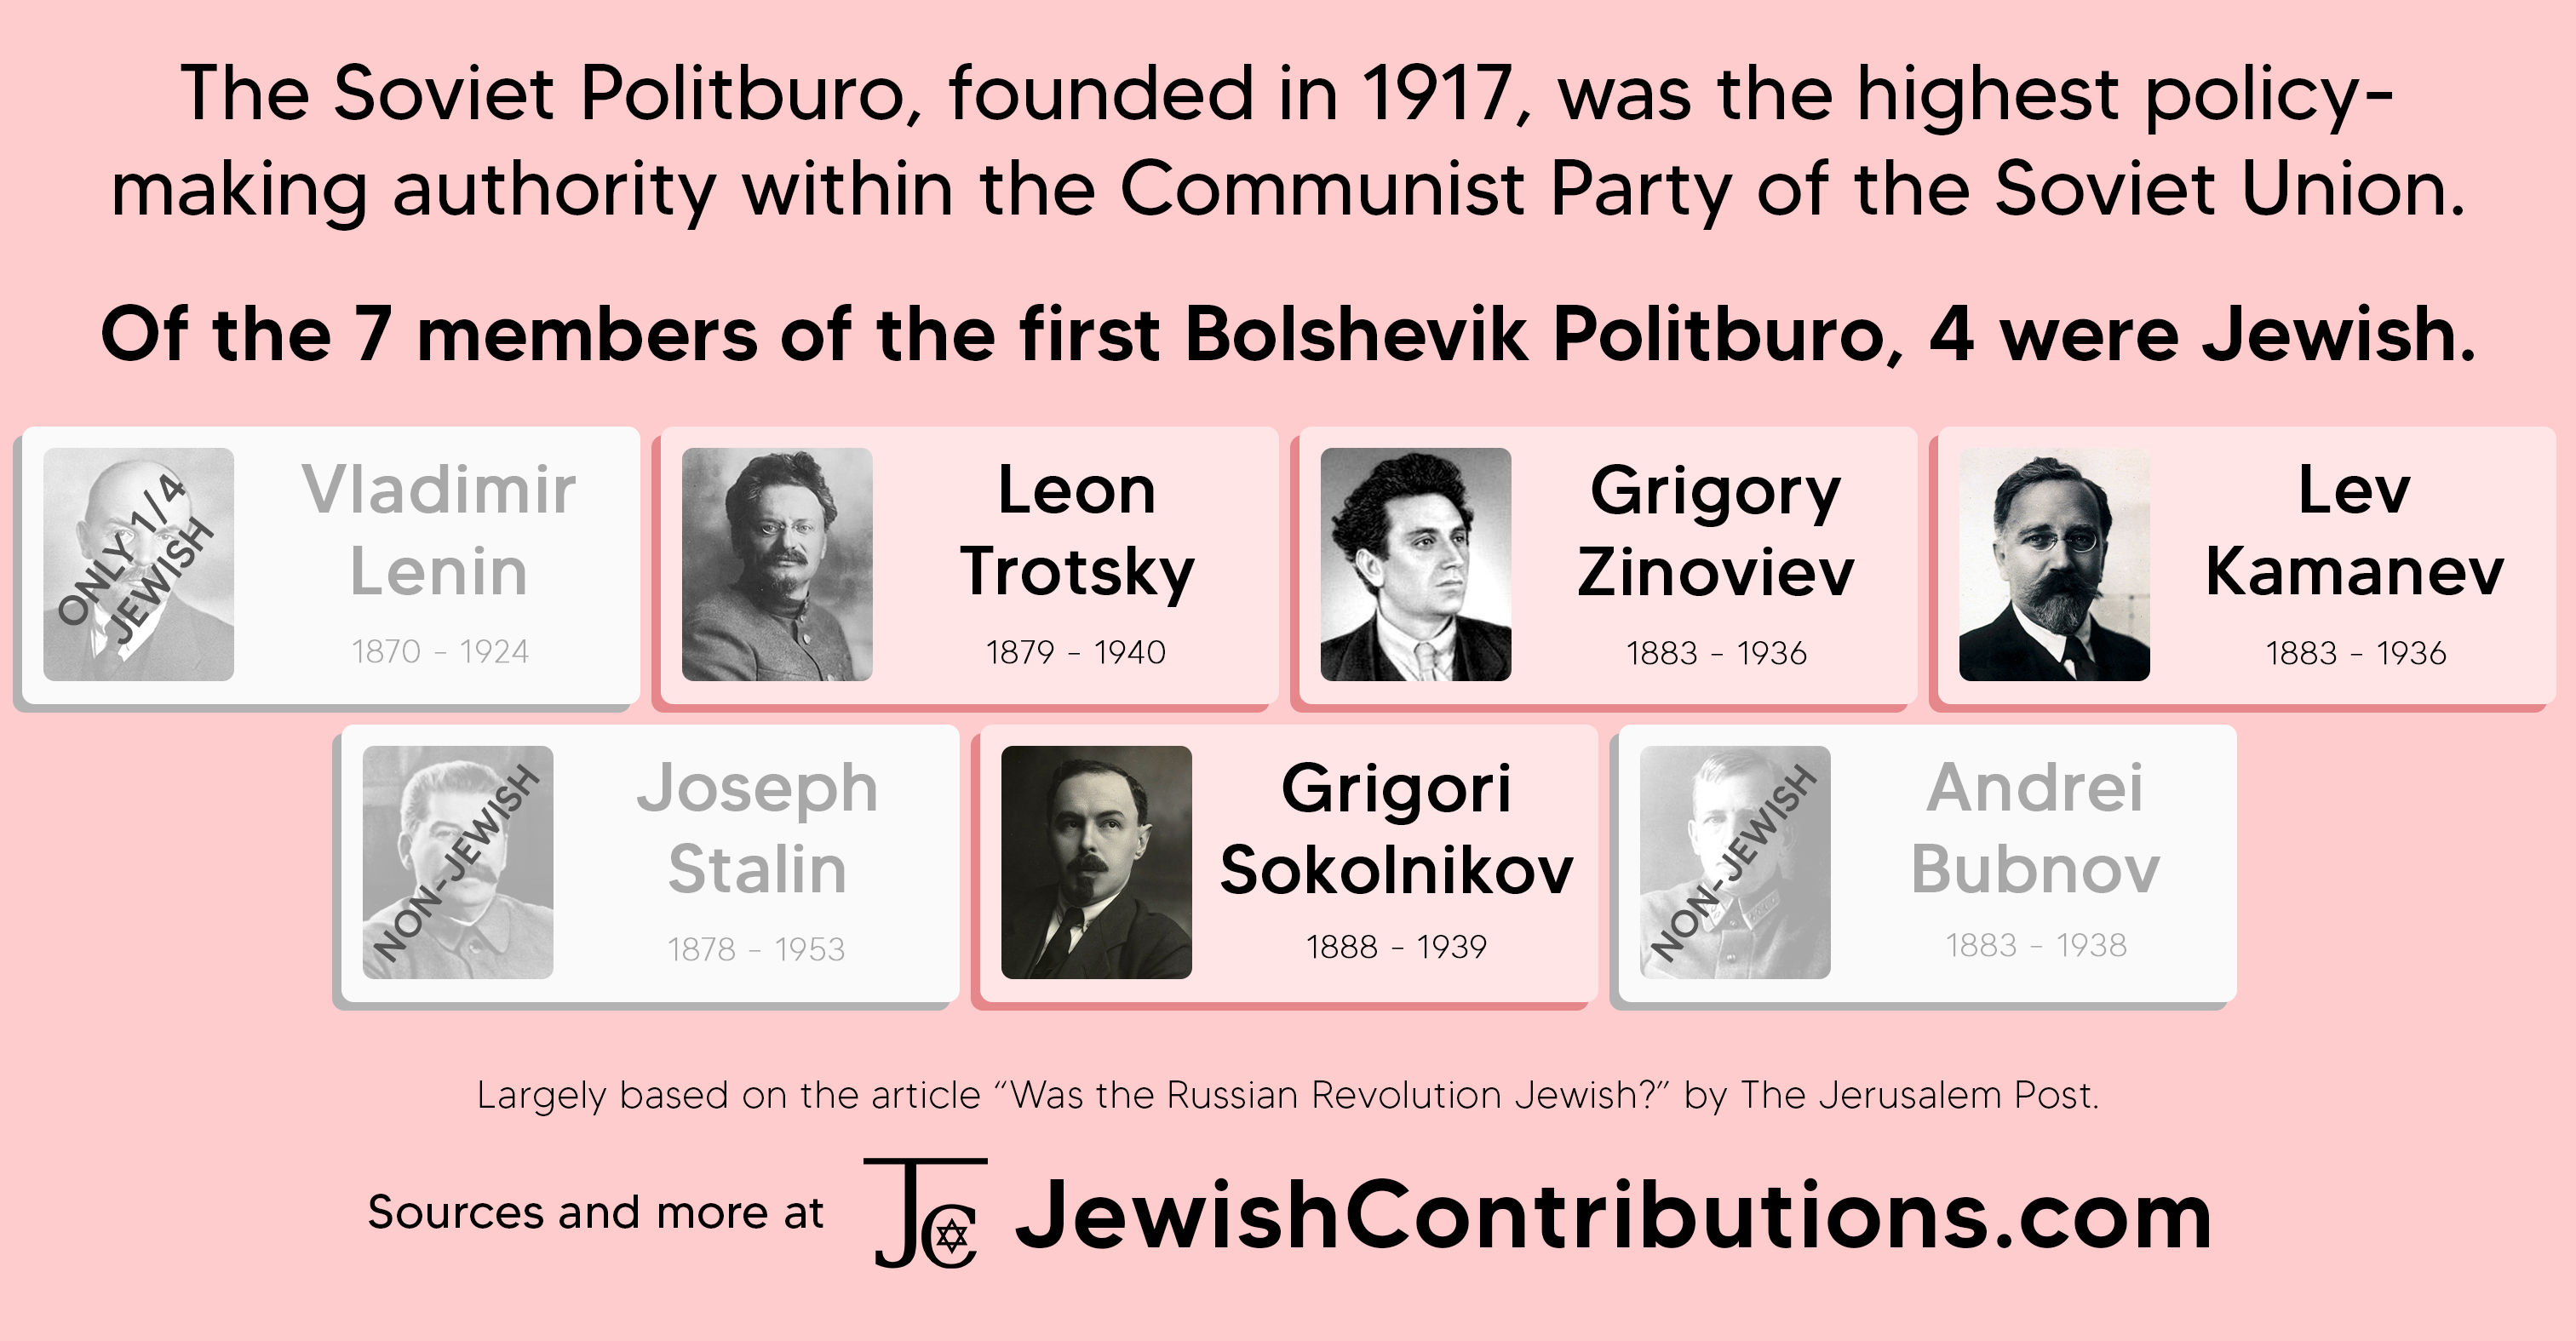 Of the 7 members of the first Bolshevik Politburo, 4 were Jewish.